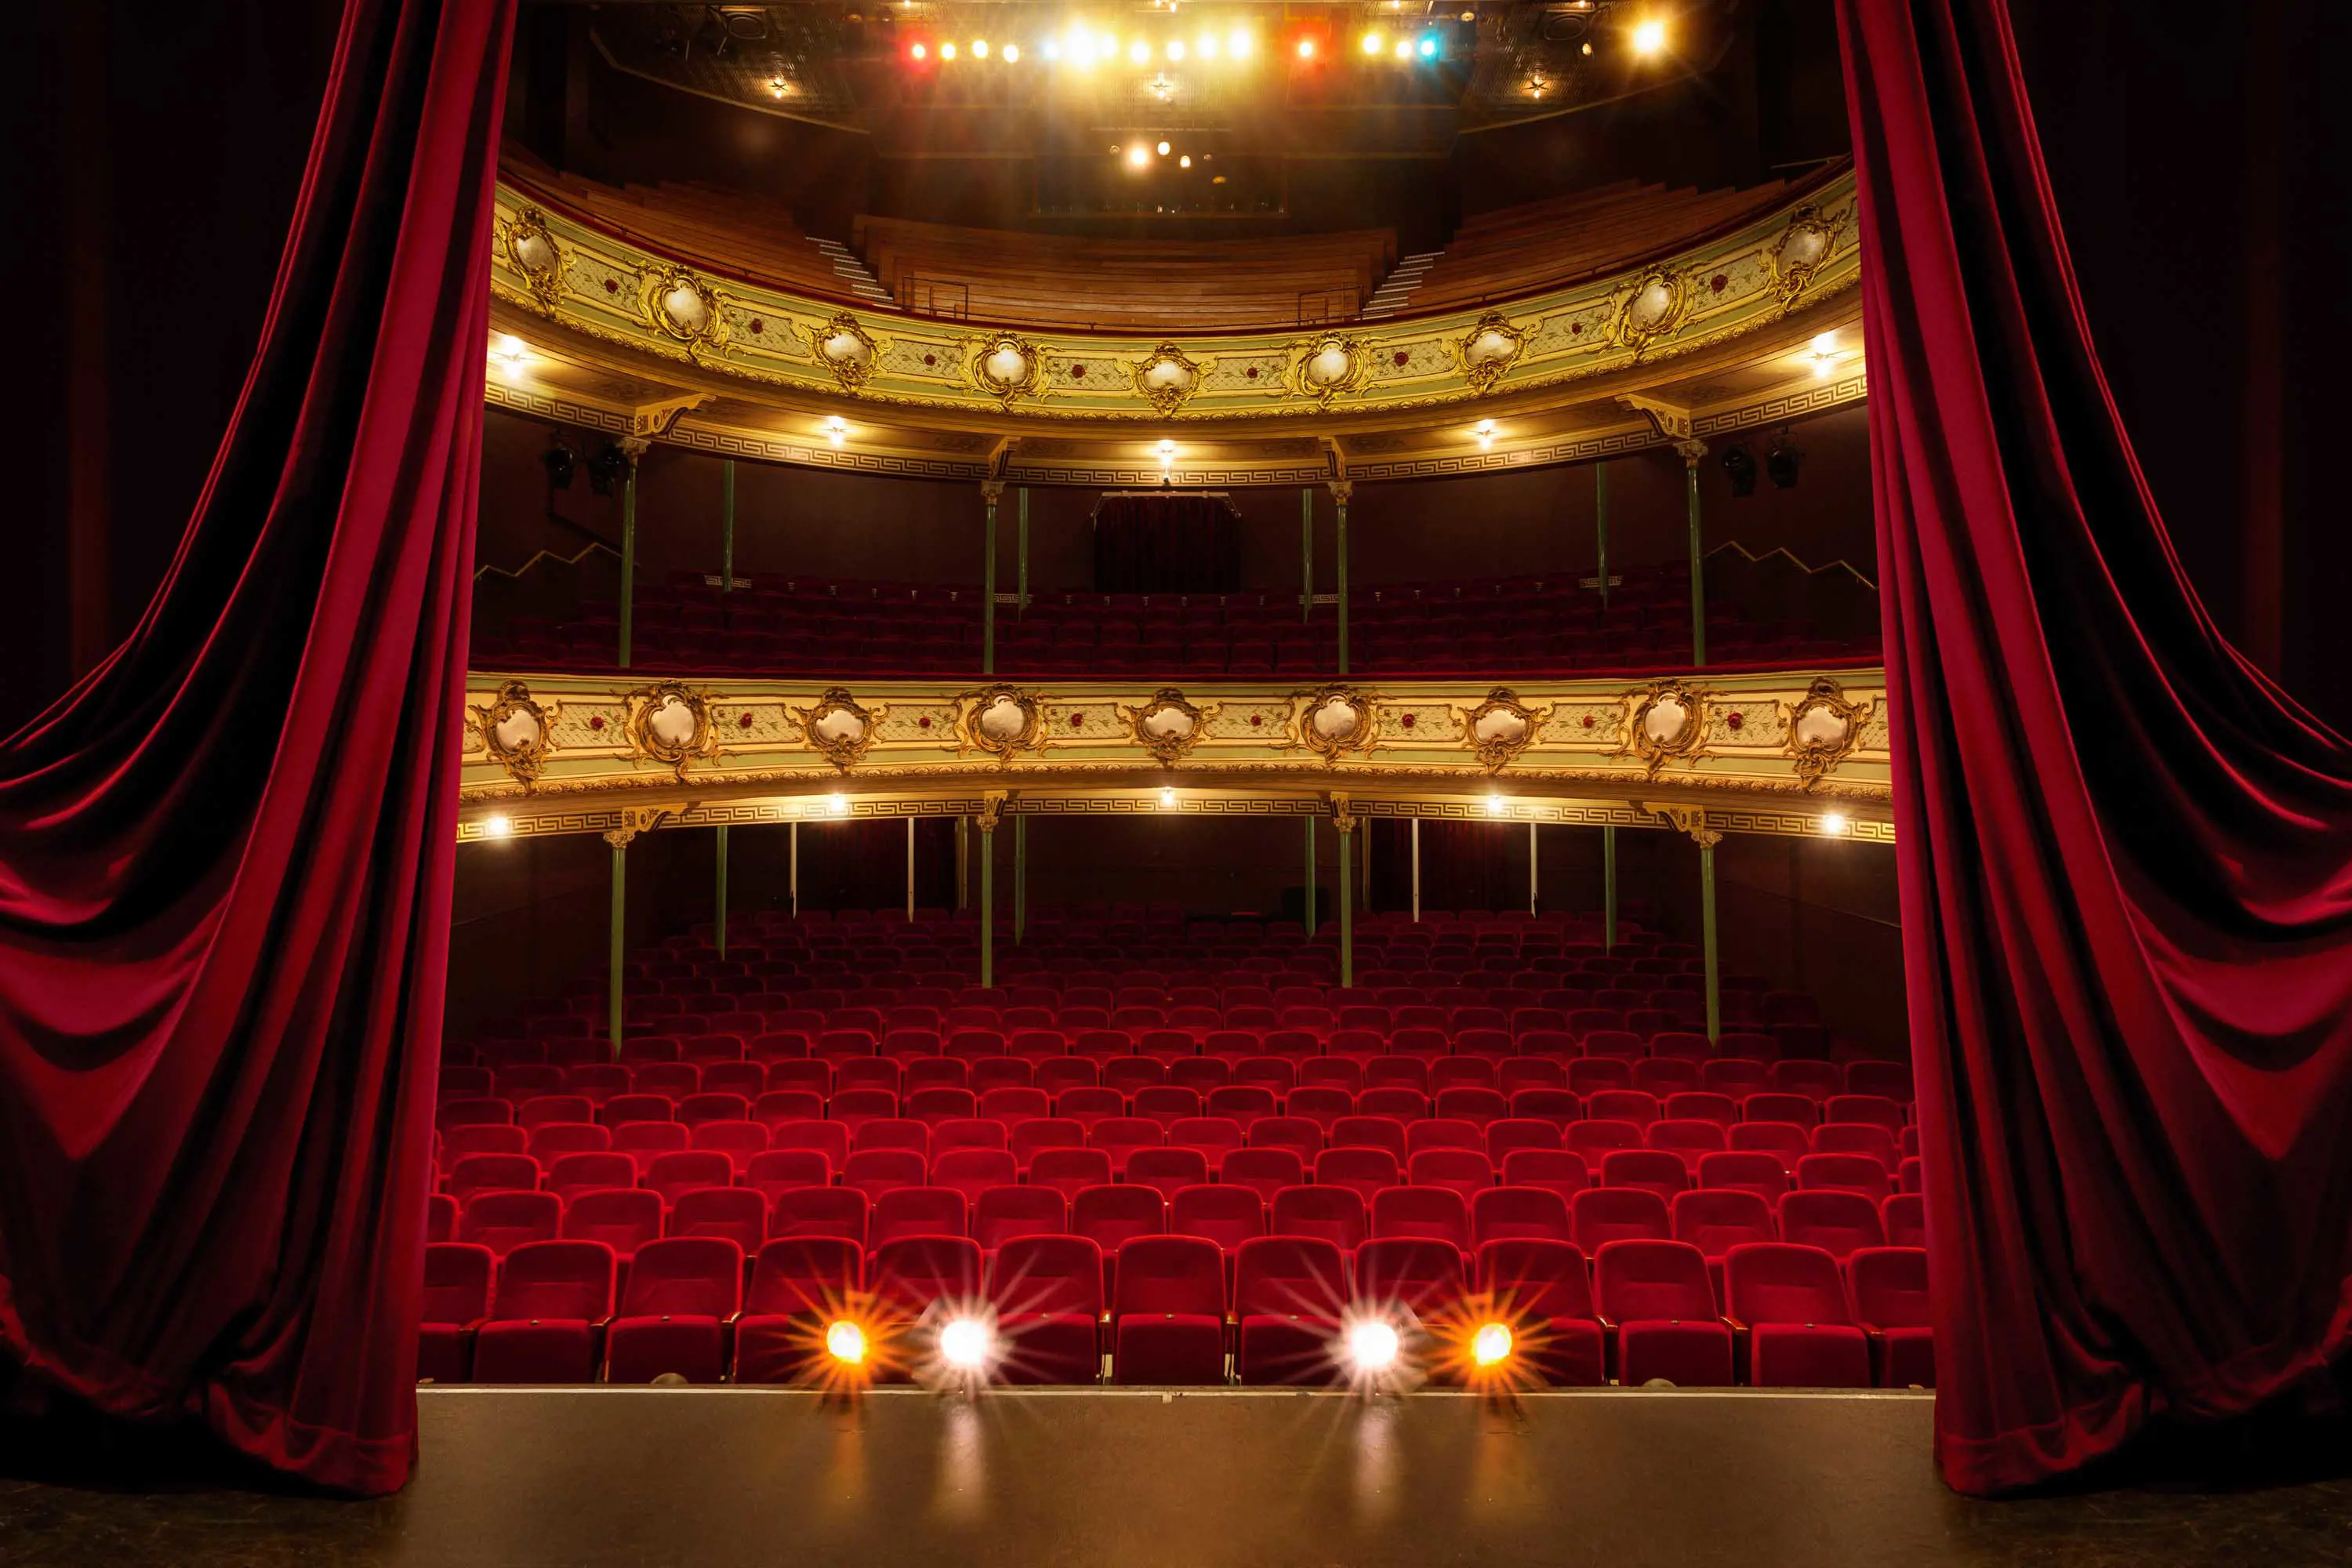 A the stage of traditional theatre in front of red velvet seats on two tiers is framed by enormous red curtains.